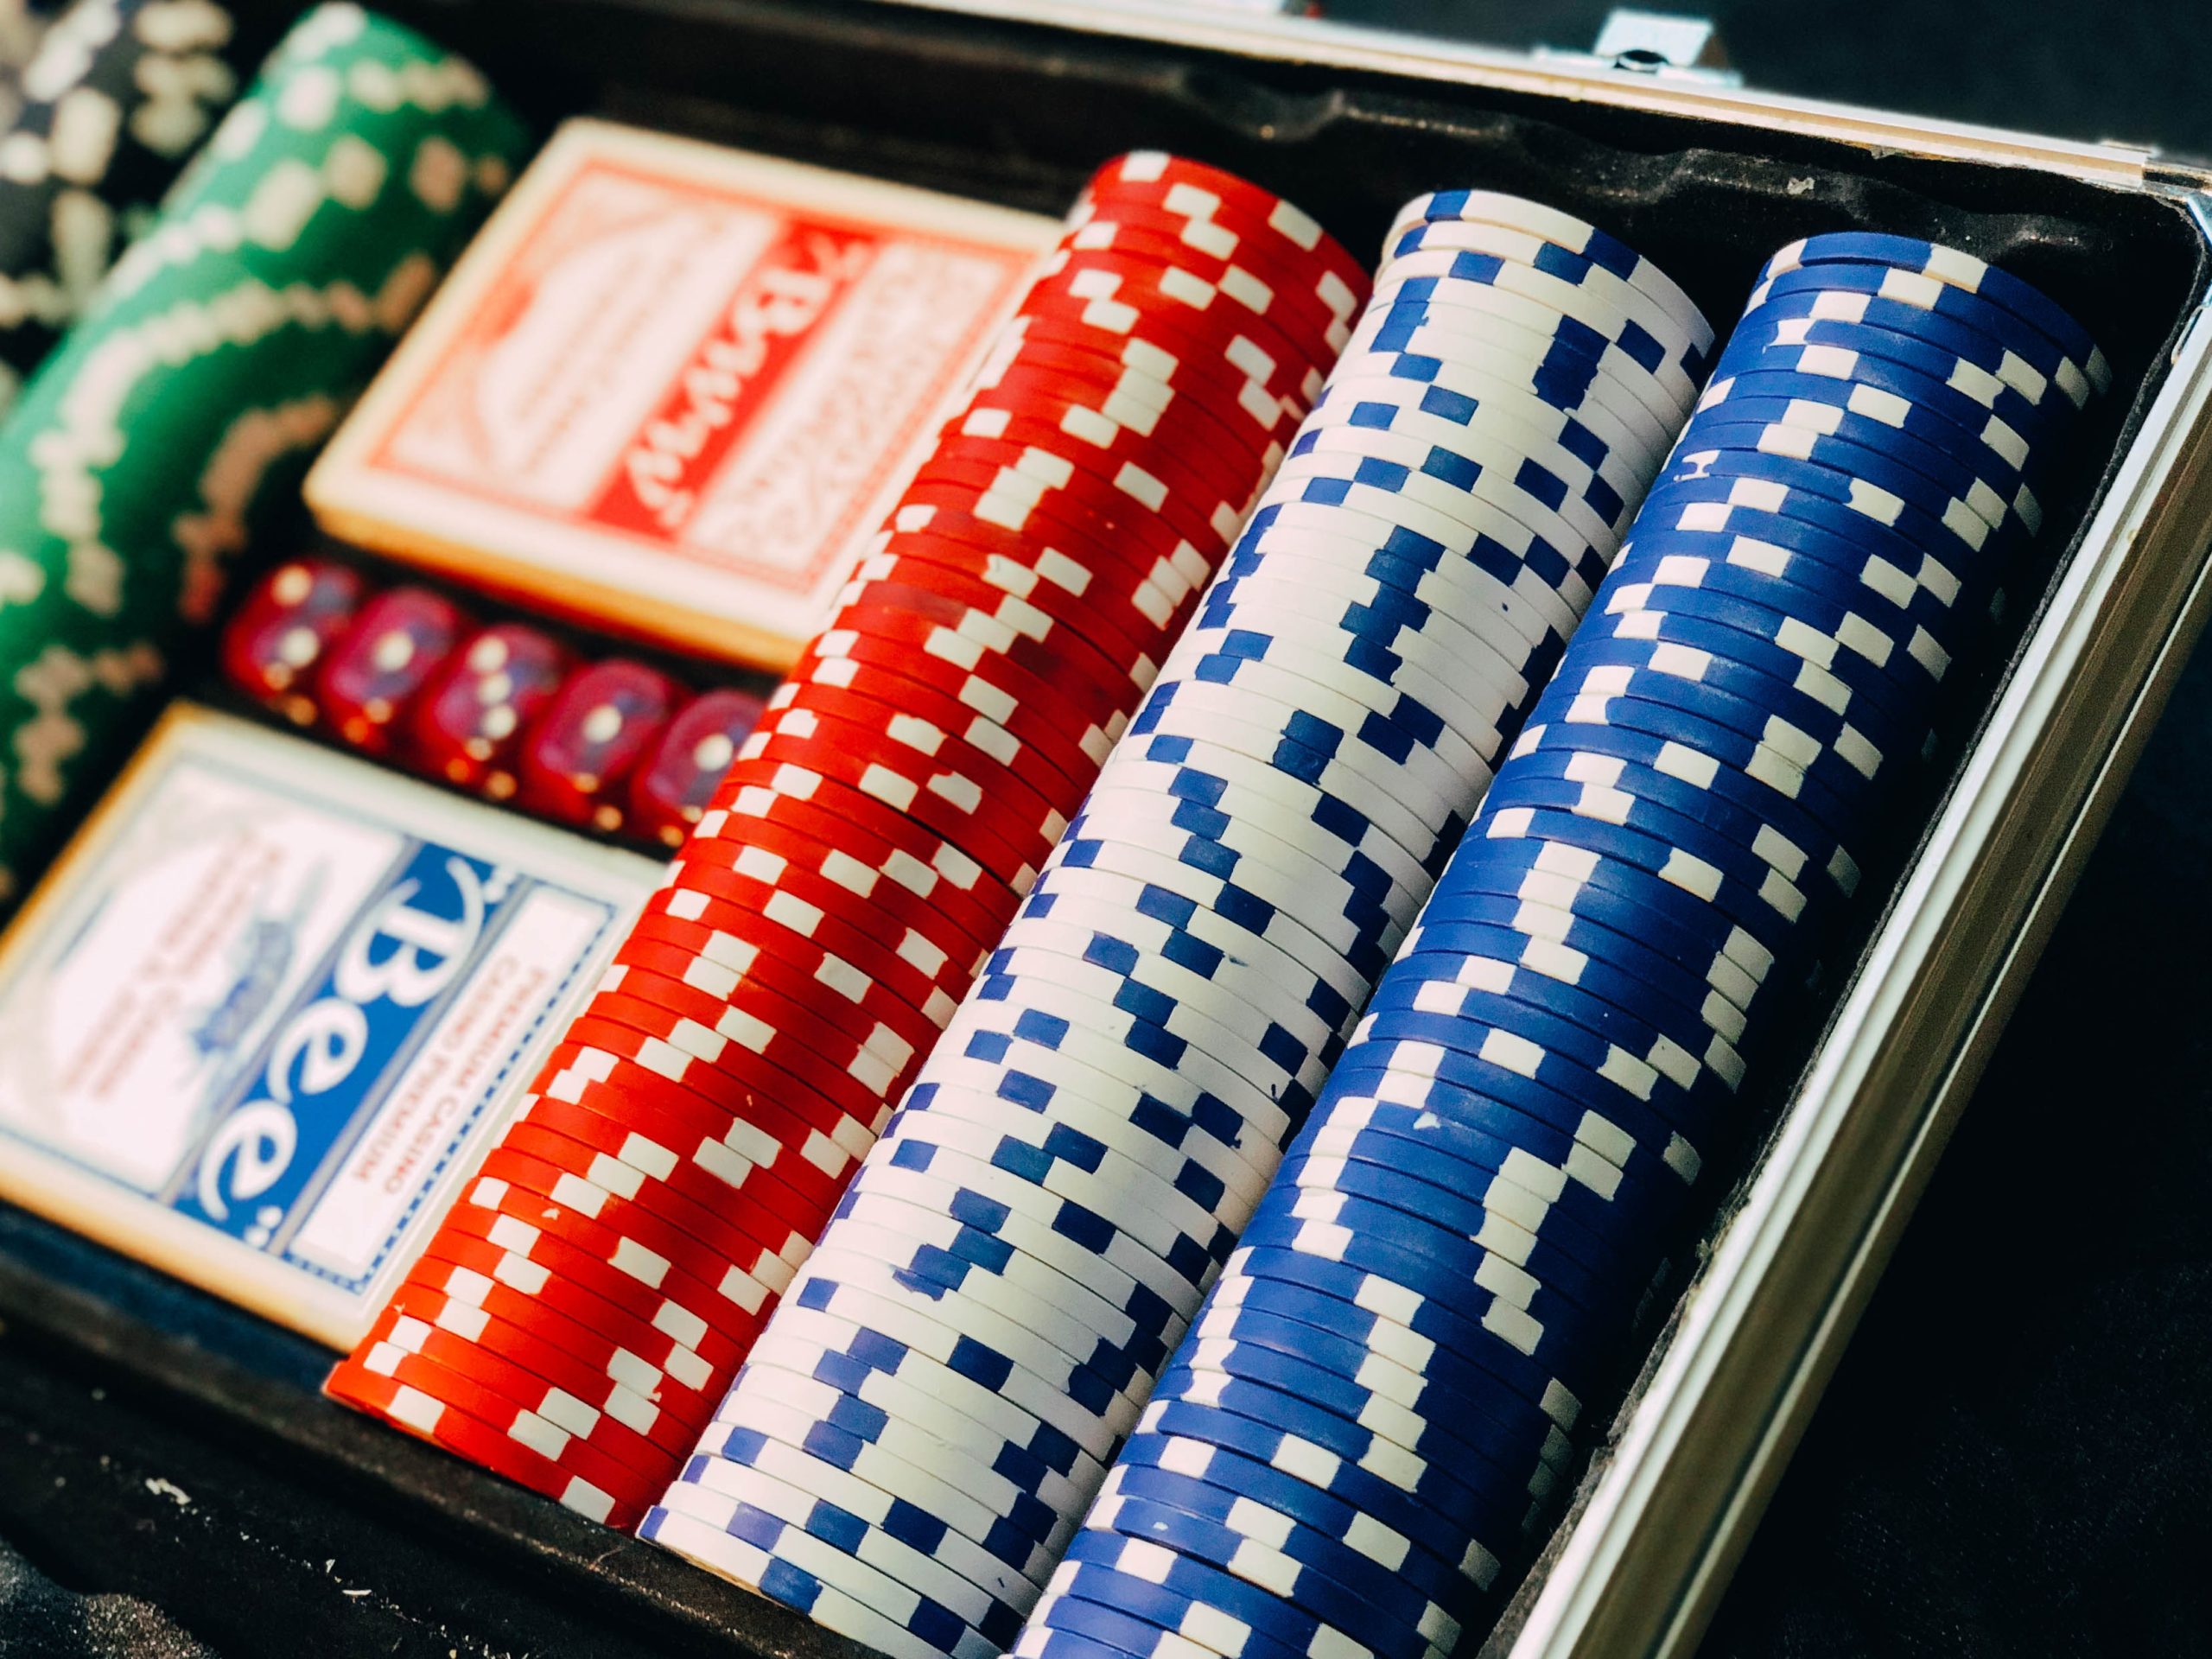 in article about online gambling, chips and cards in a case